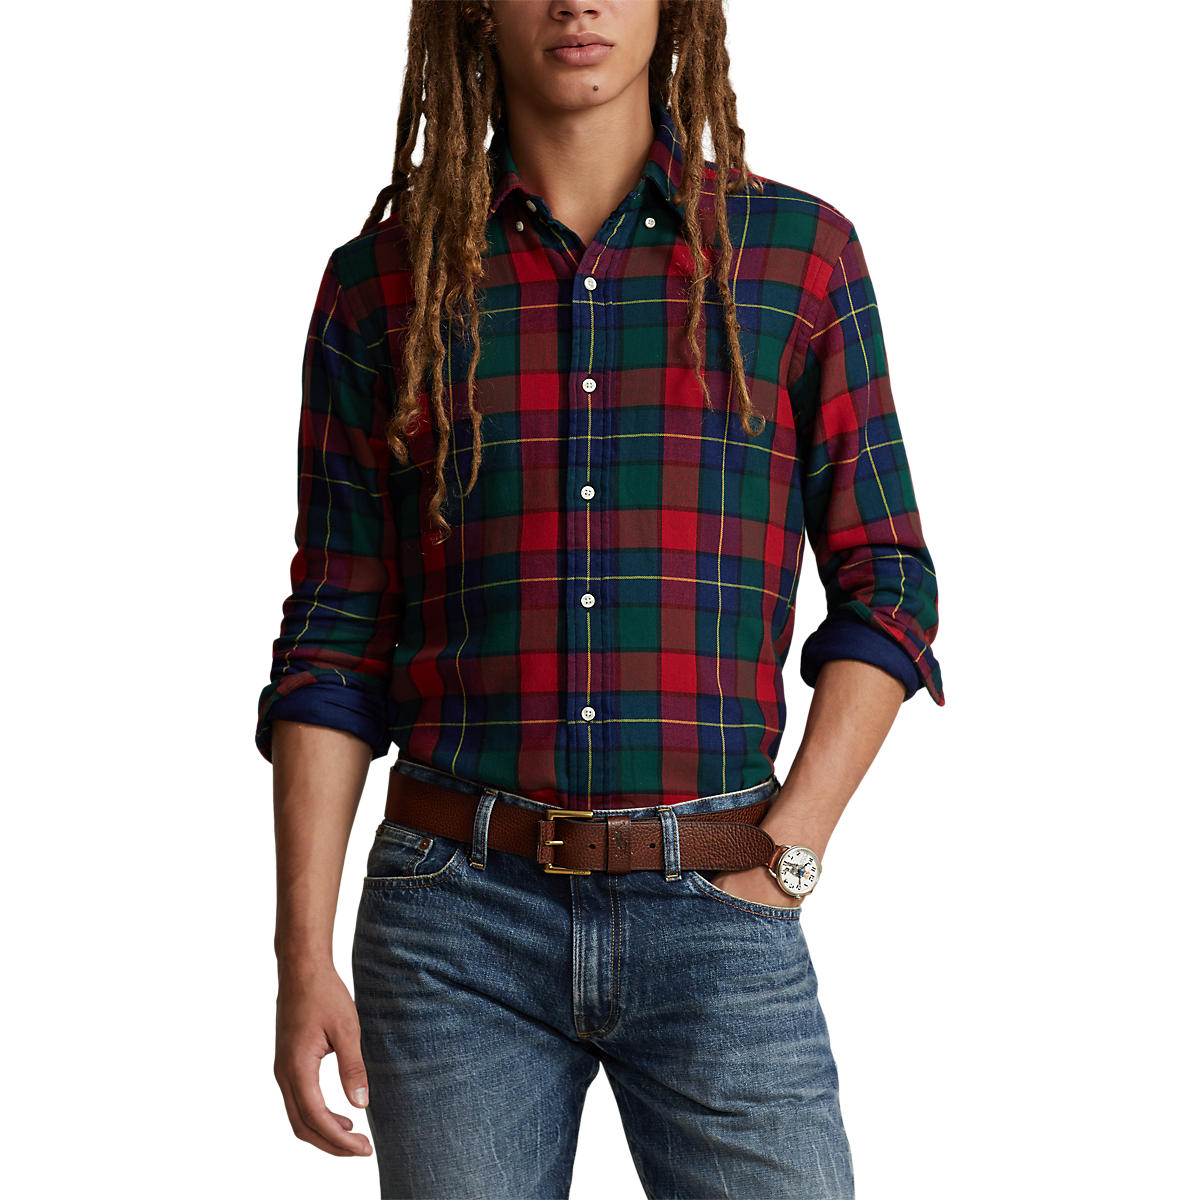 Men's Custom Fit Checked Double-Faced Shirt Red Green Multi